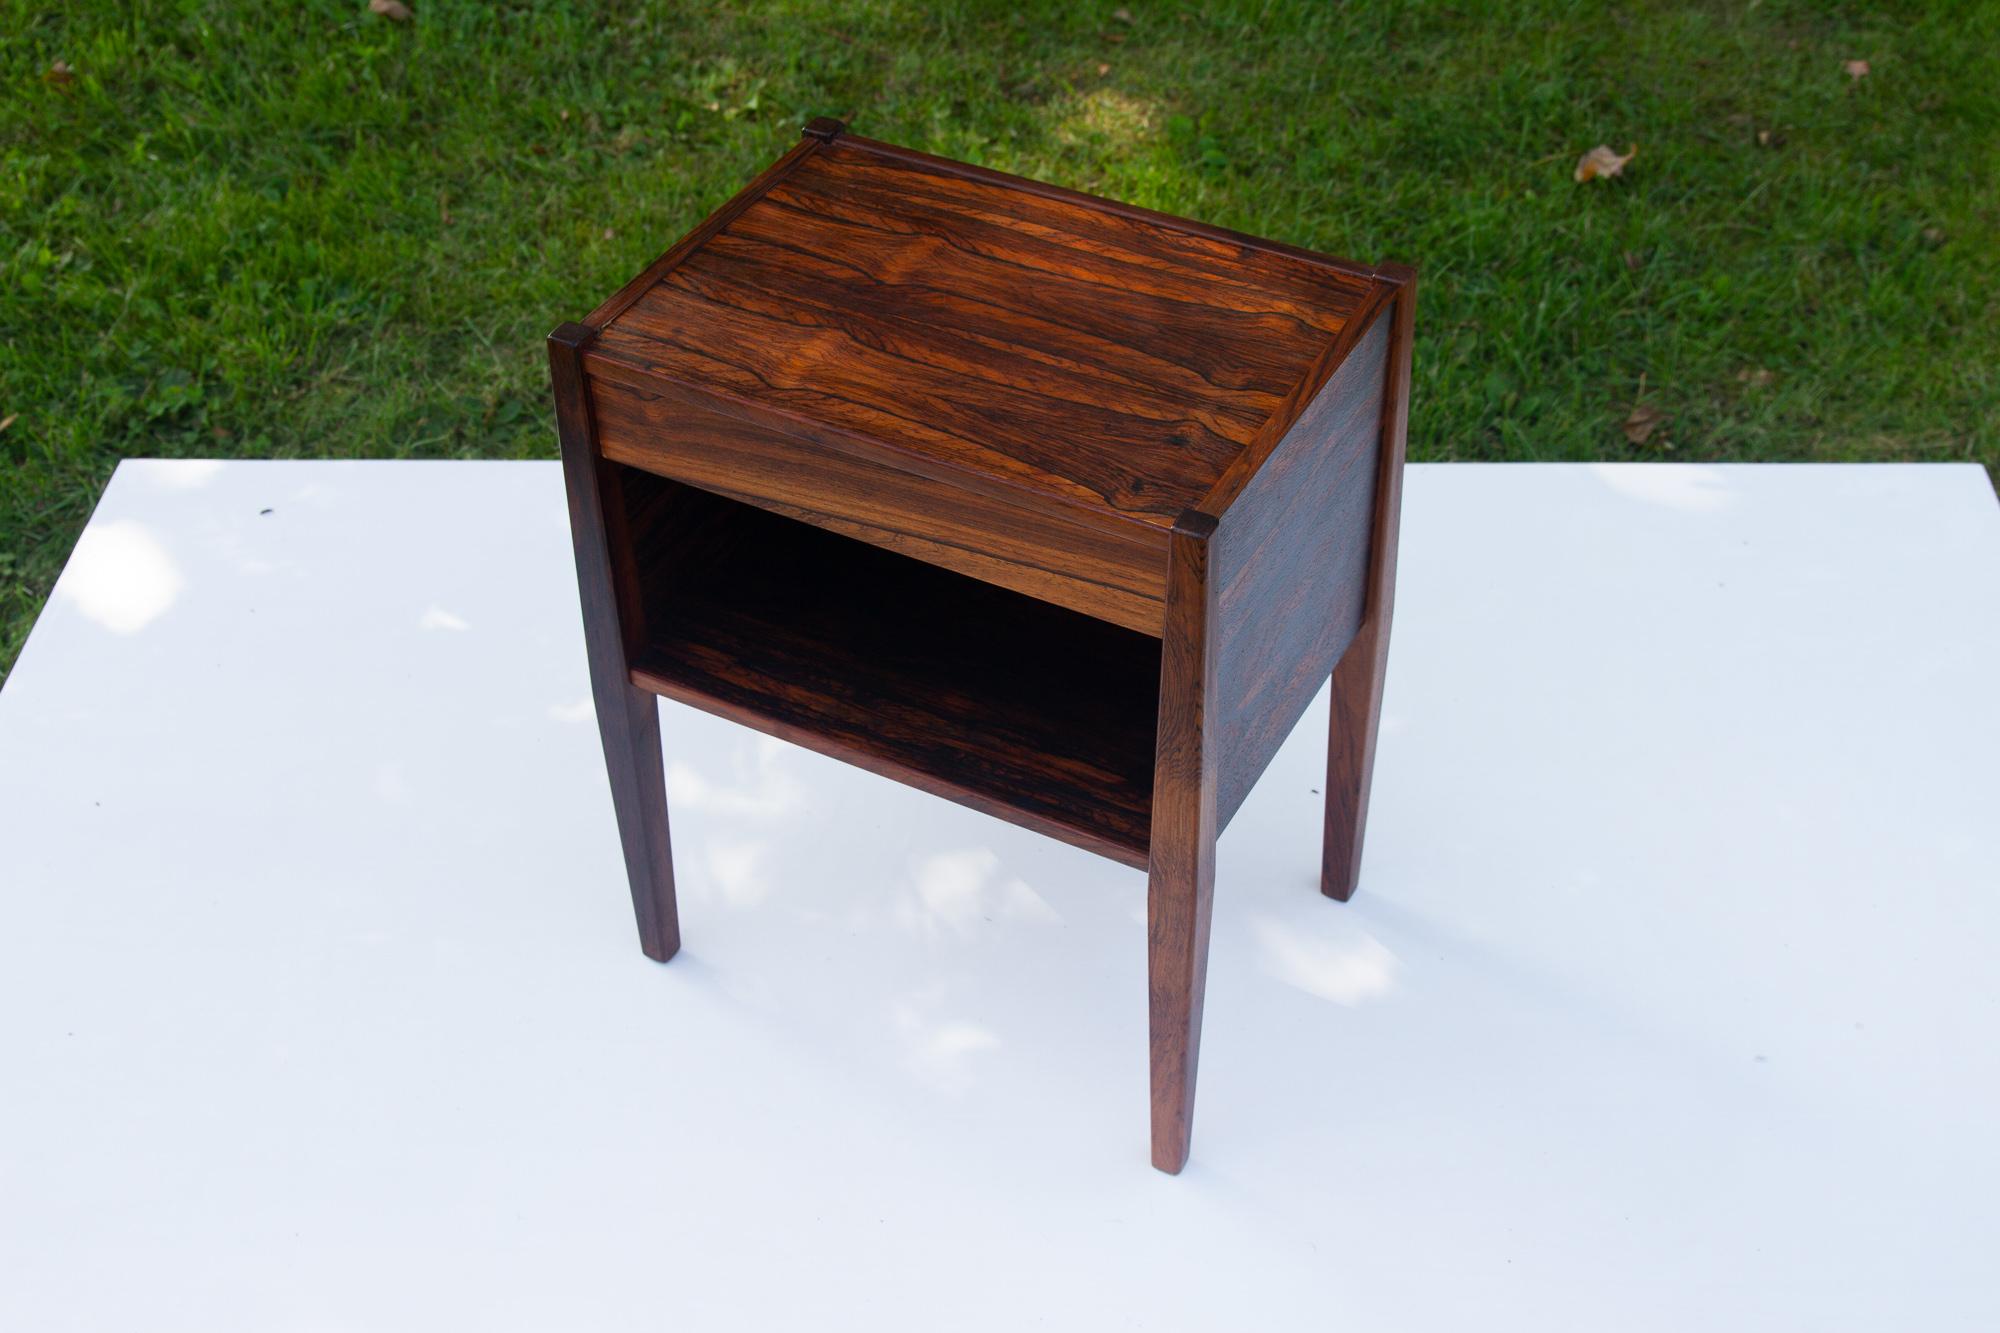 Vintage Danish rosewood bedside table 1960s.
Elegant small side table in Rosewood with open shelf and drawer. Very expressive veneer patterns. Tapered legs. Manufactured in Denmark in the 1960s.
Suitable for multiple purposes as side table, lamp